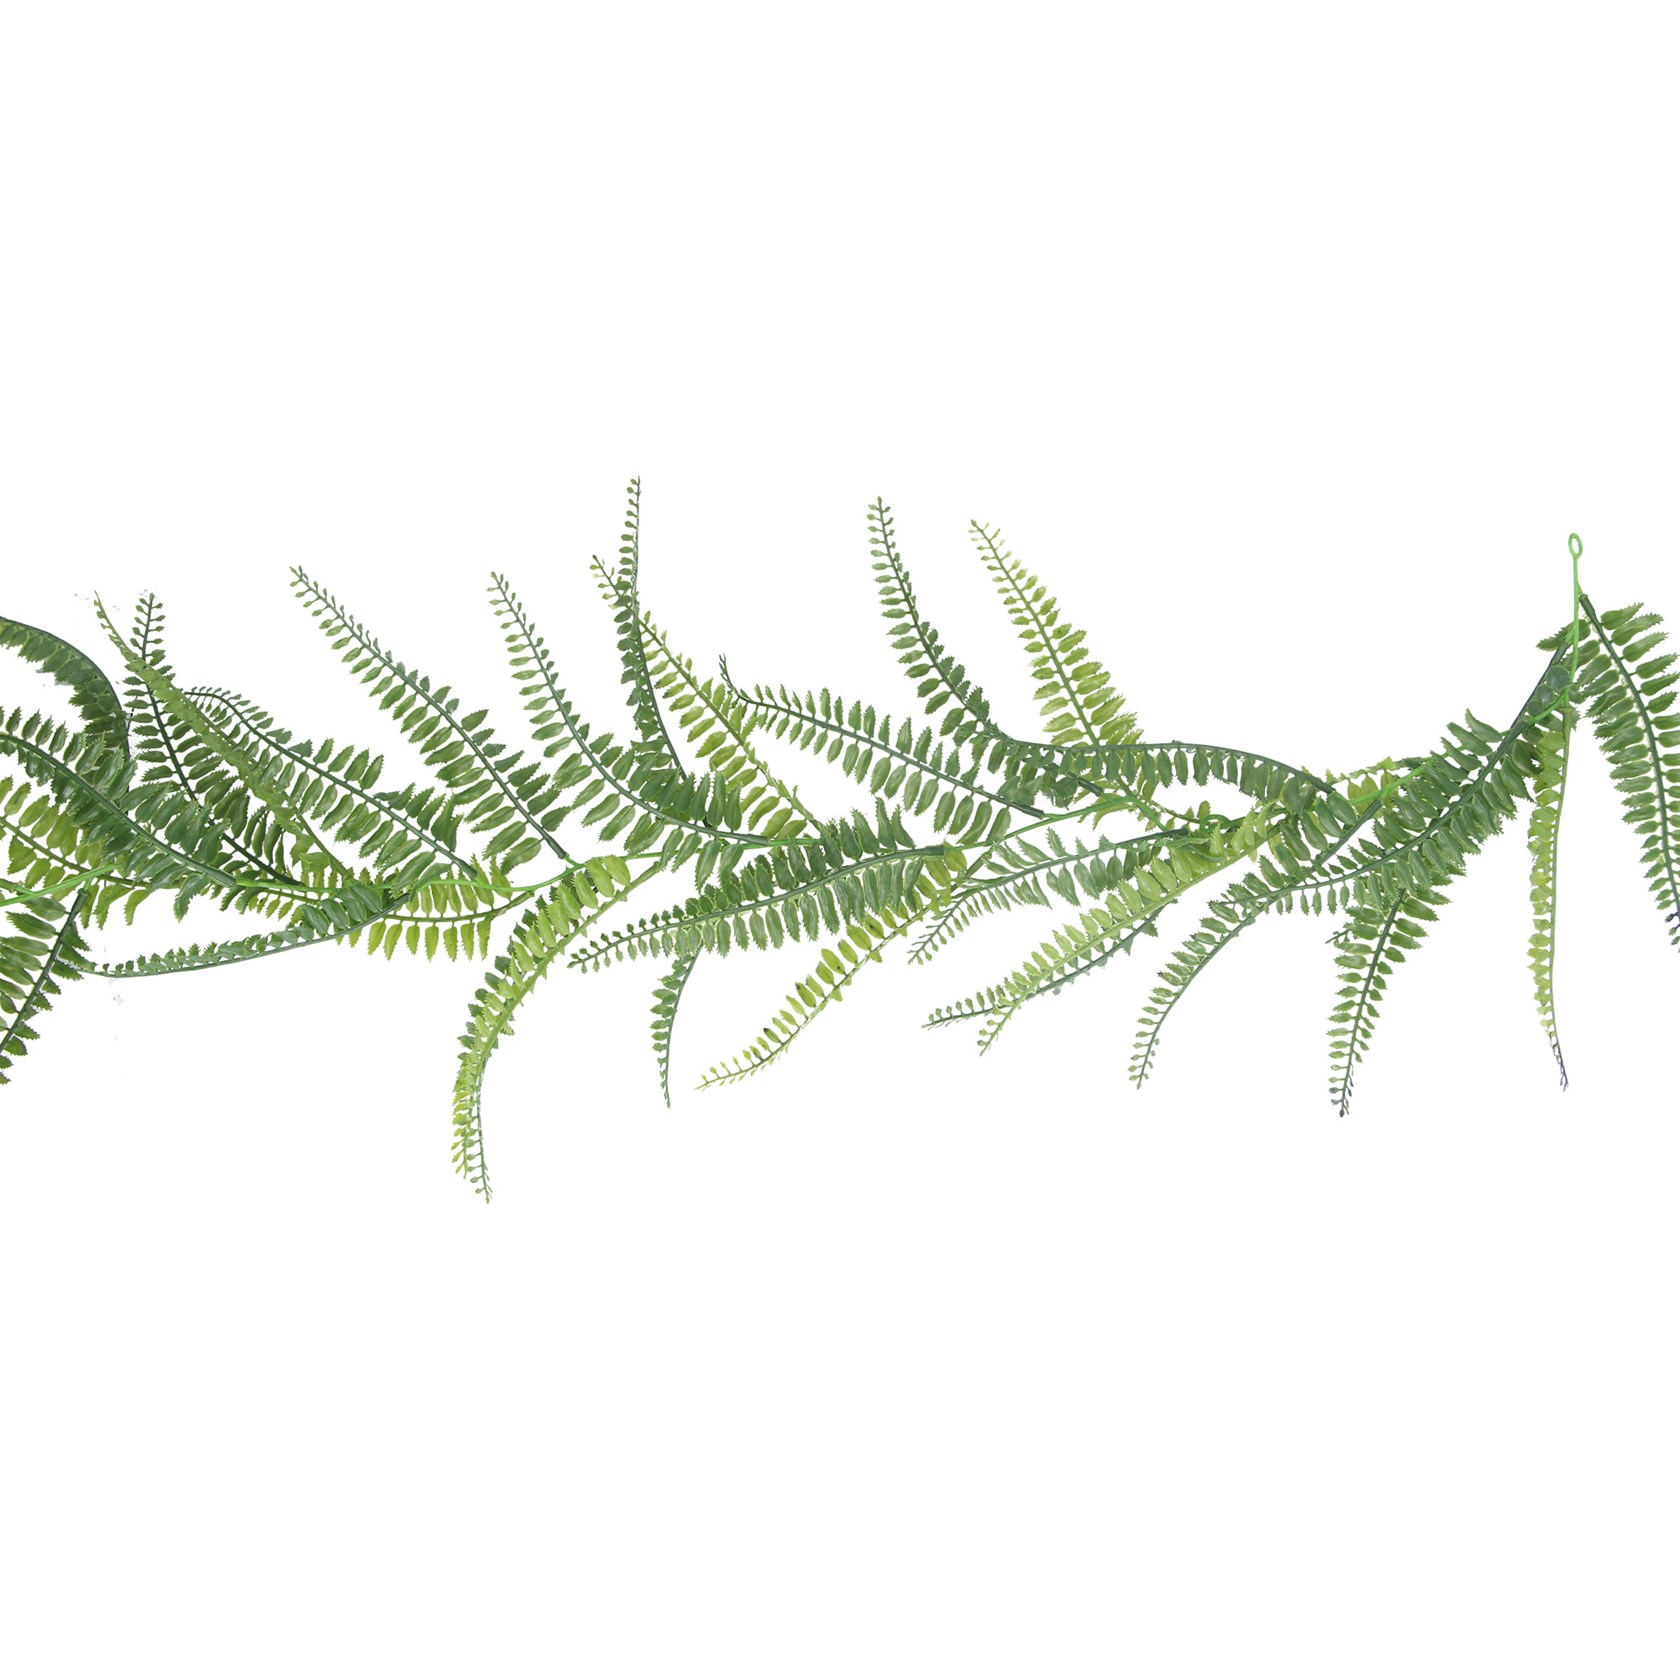 A green faux fern hanging garland. The perfect addition to your home or the perfect gift for yourself or a loved one. By London desoigner Gisela Graham.